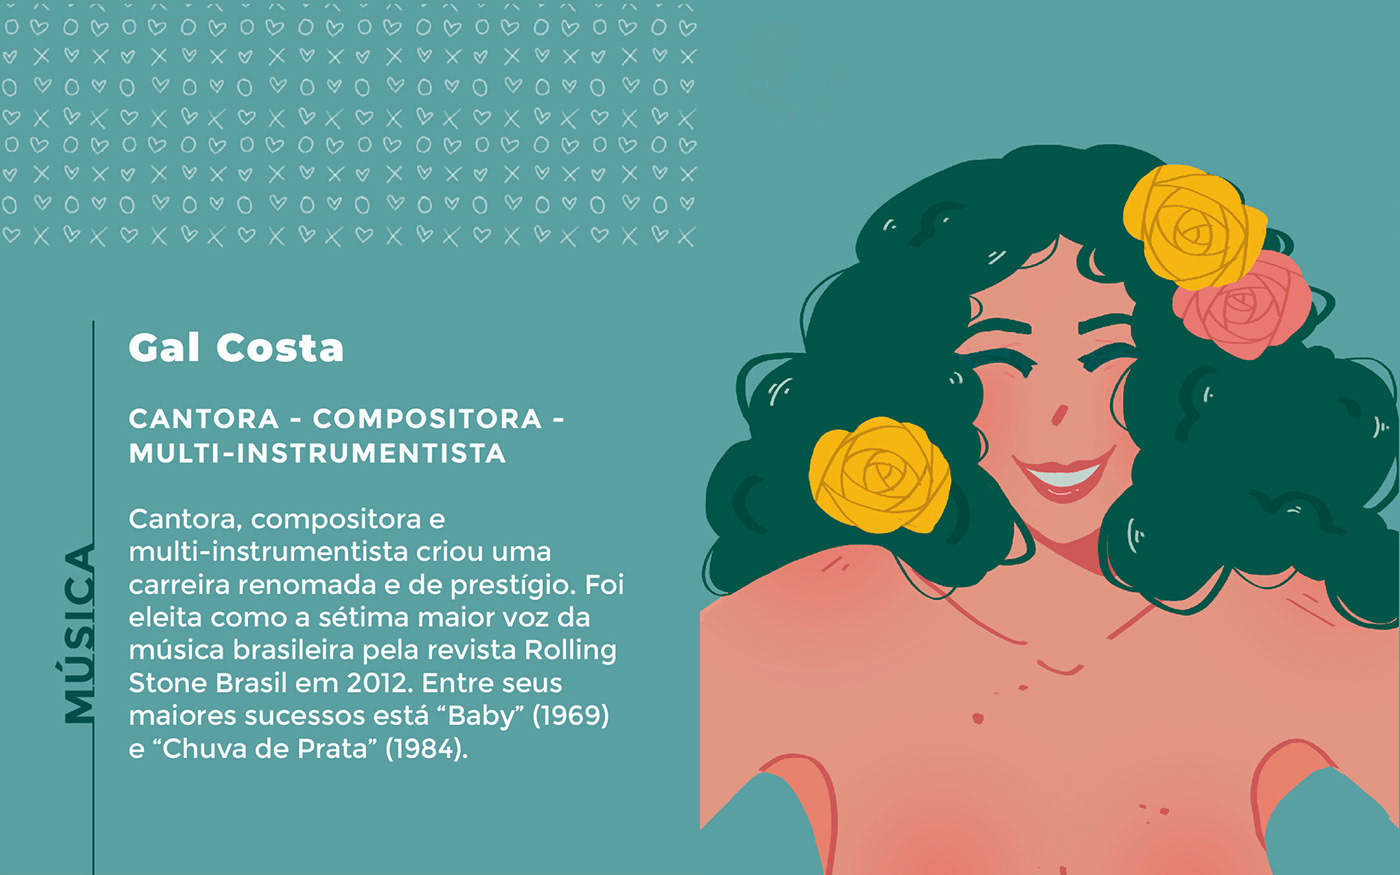 An illustrated portrait of Gal Costa, a famous brazilian popular singer.